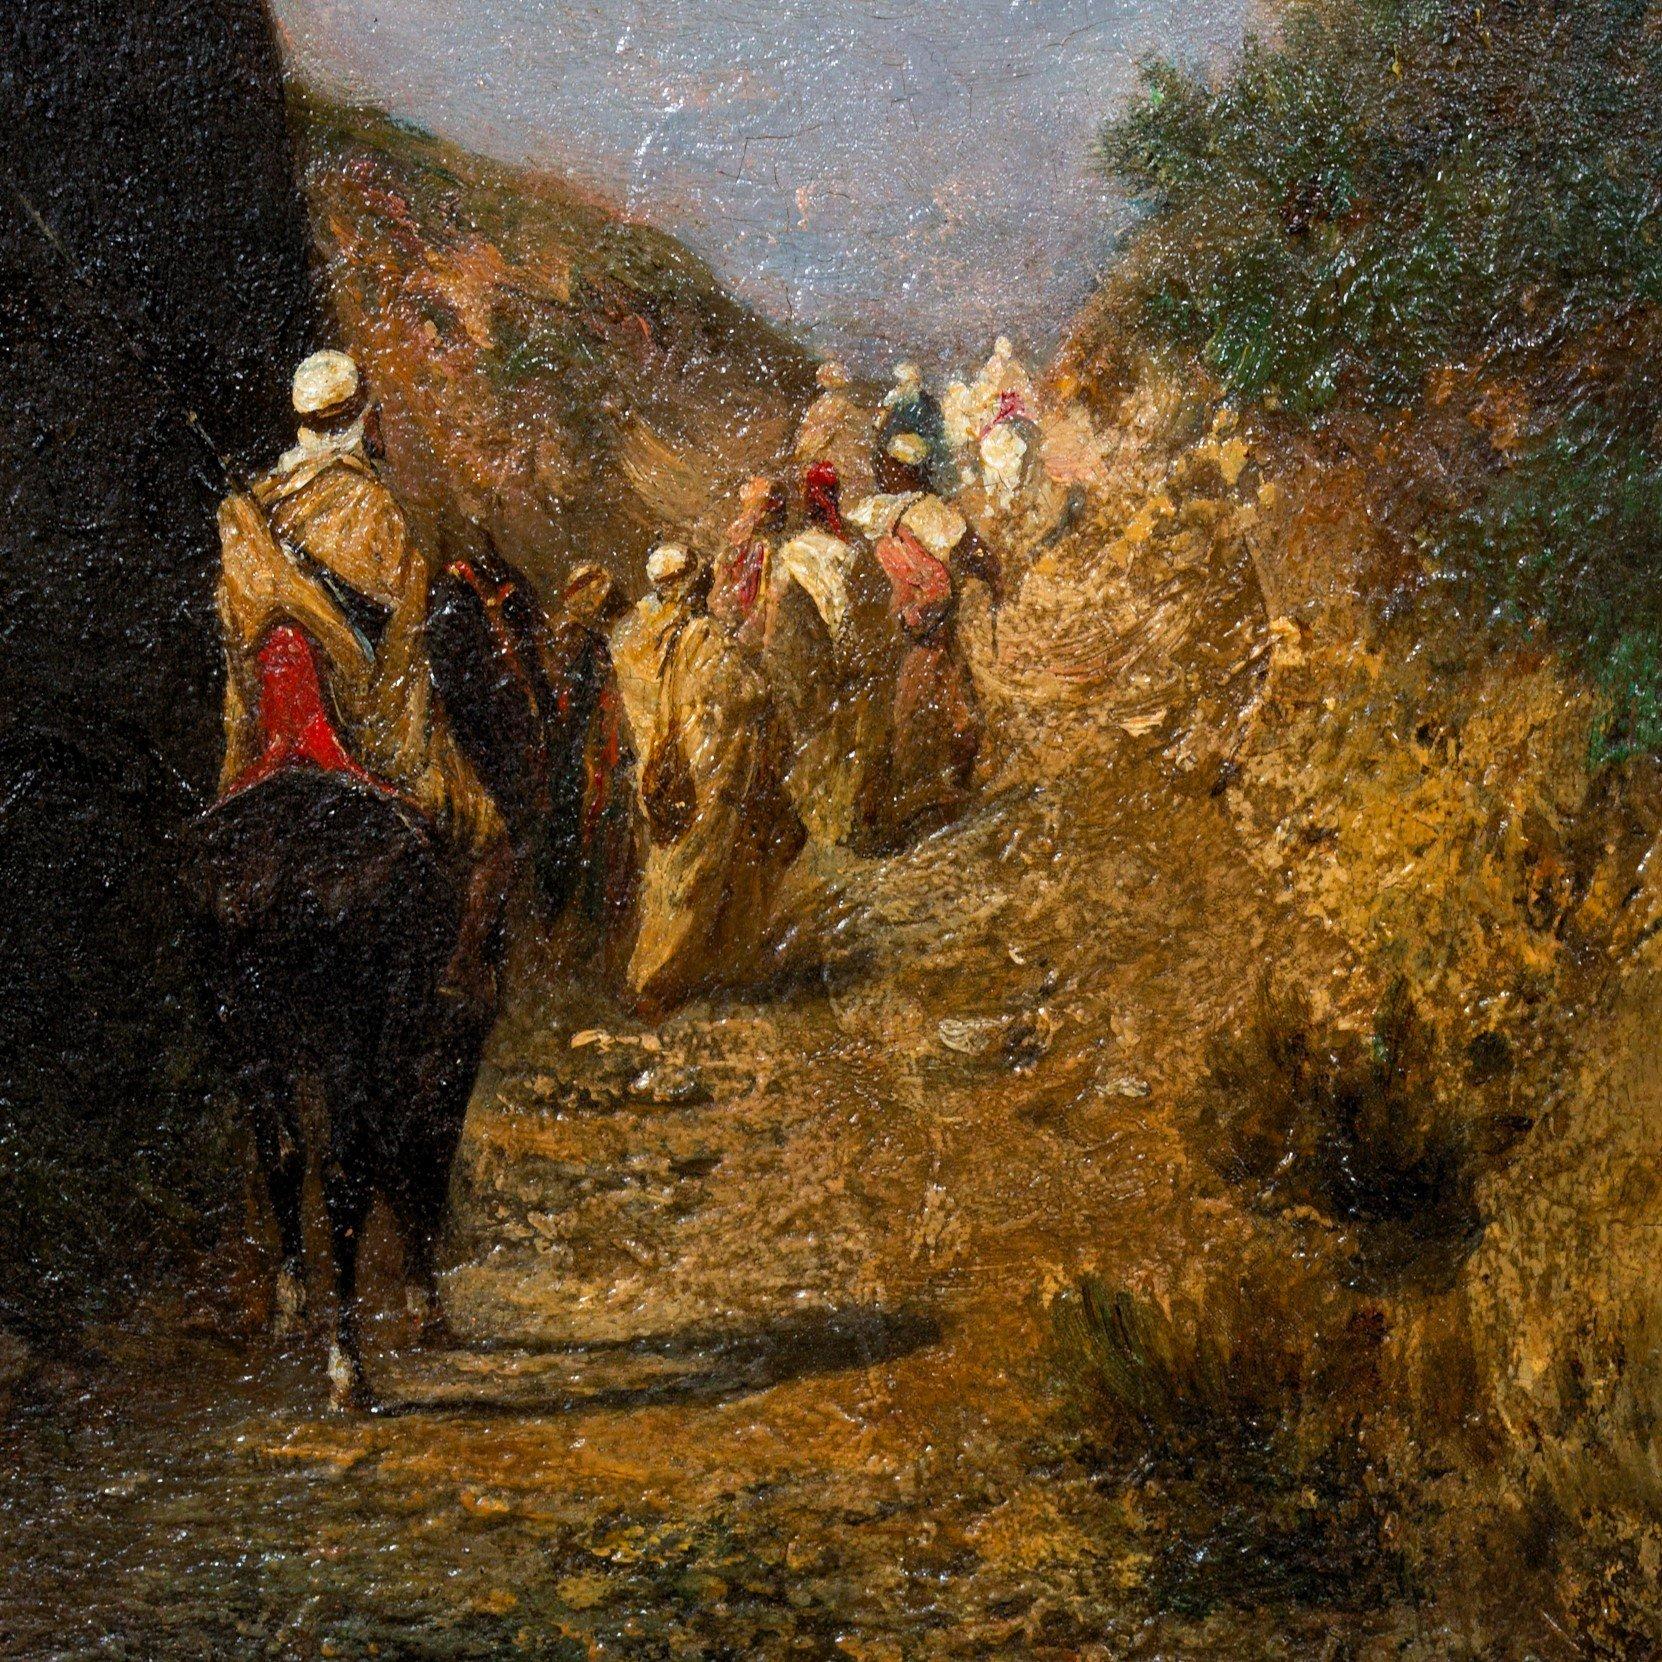 Riders and Bedouins walking on a path near a cliff, Oil on panel by Honoré BOZE For Sale 2